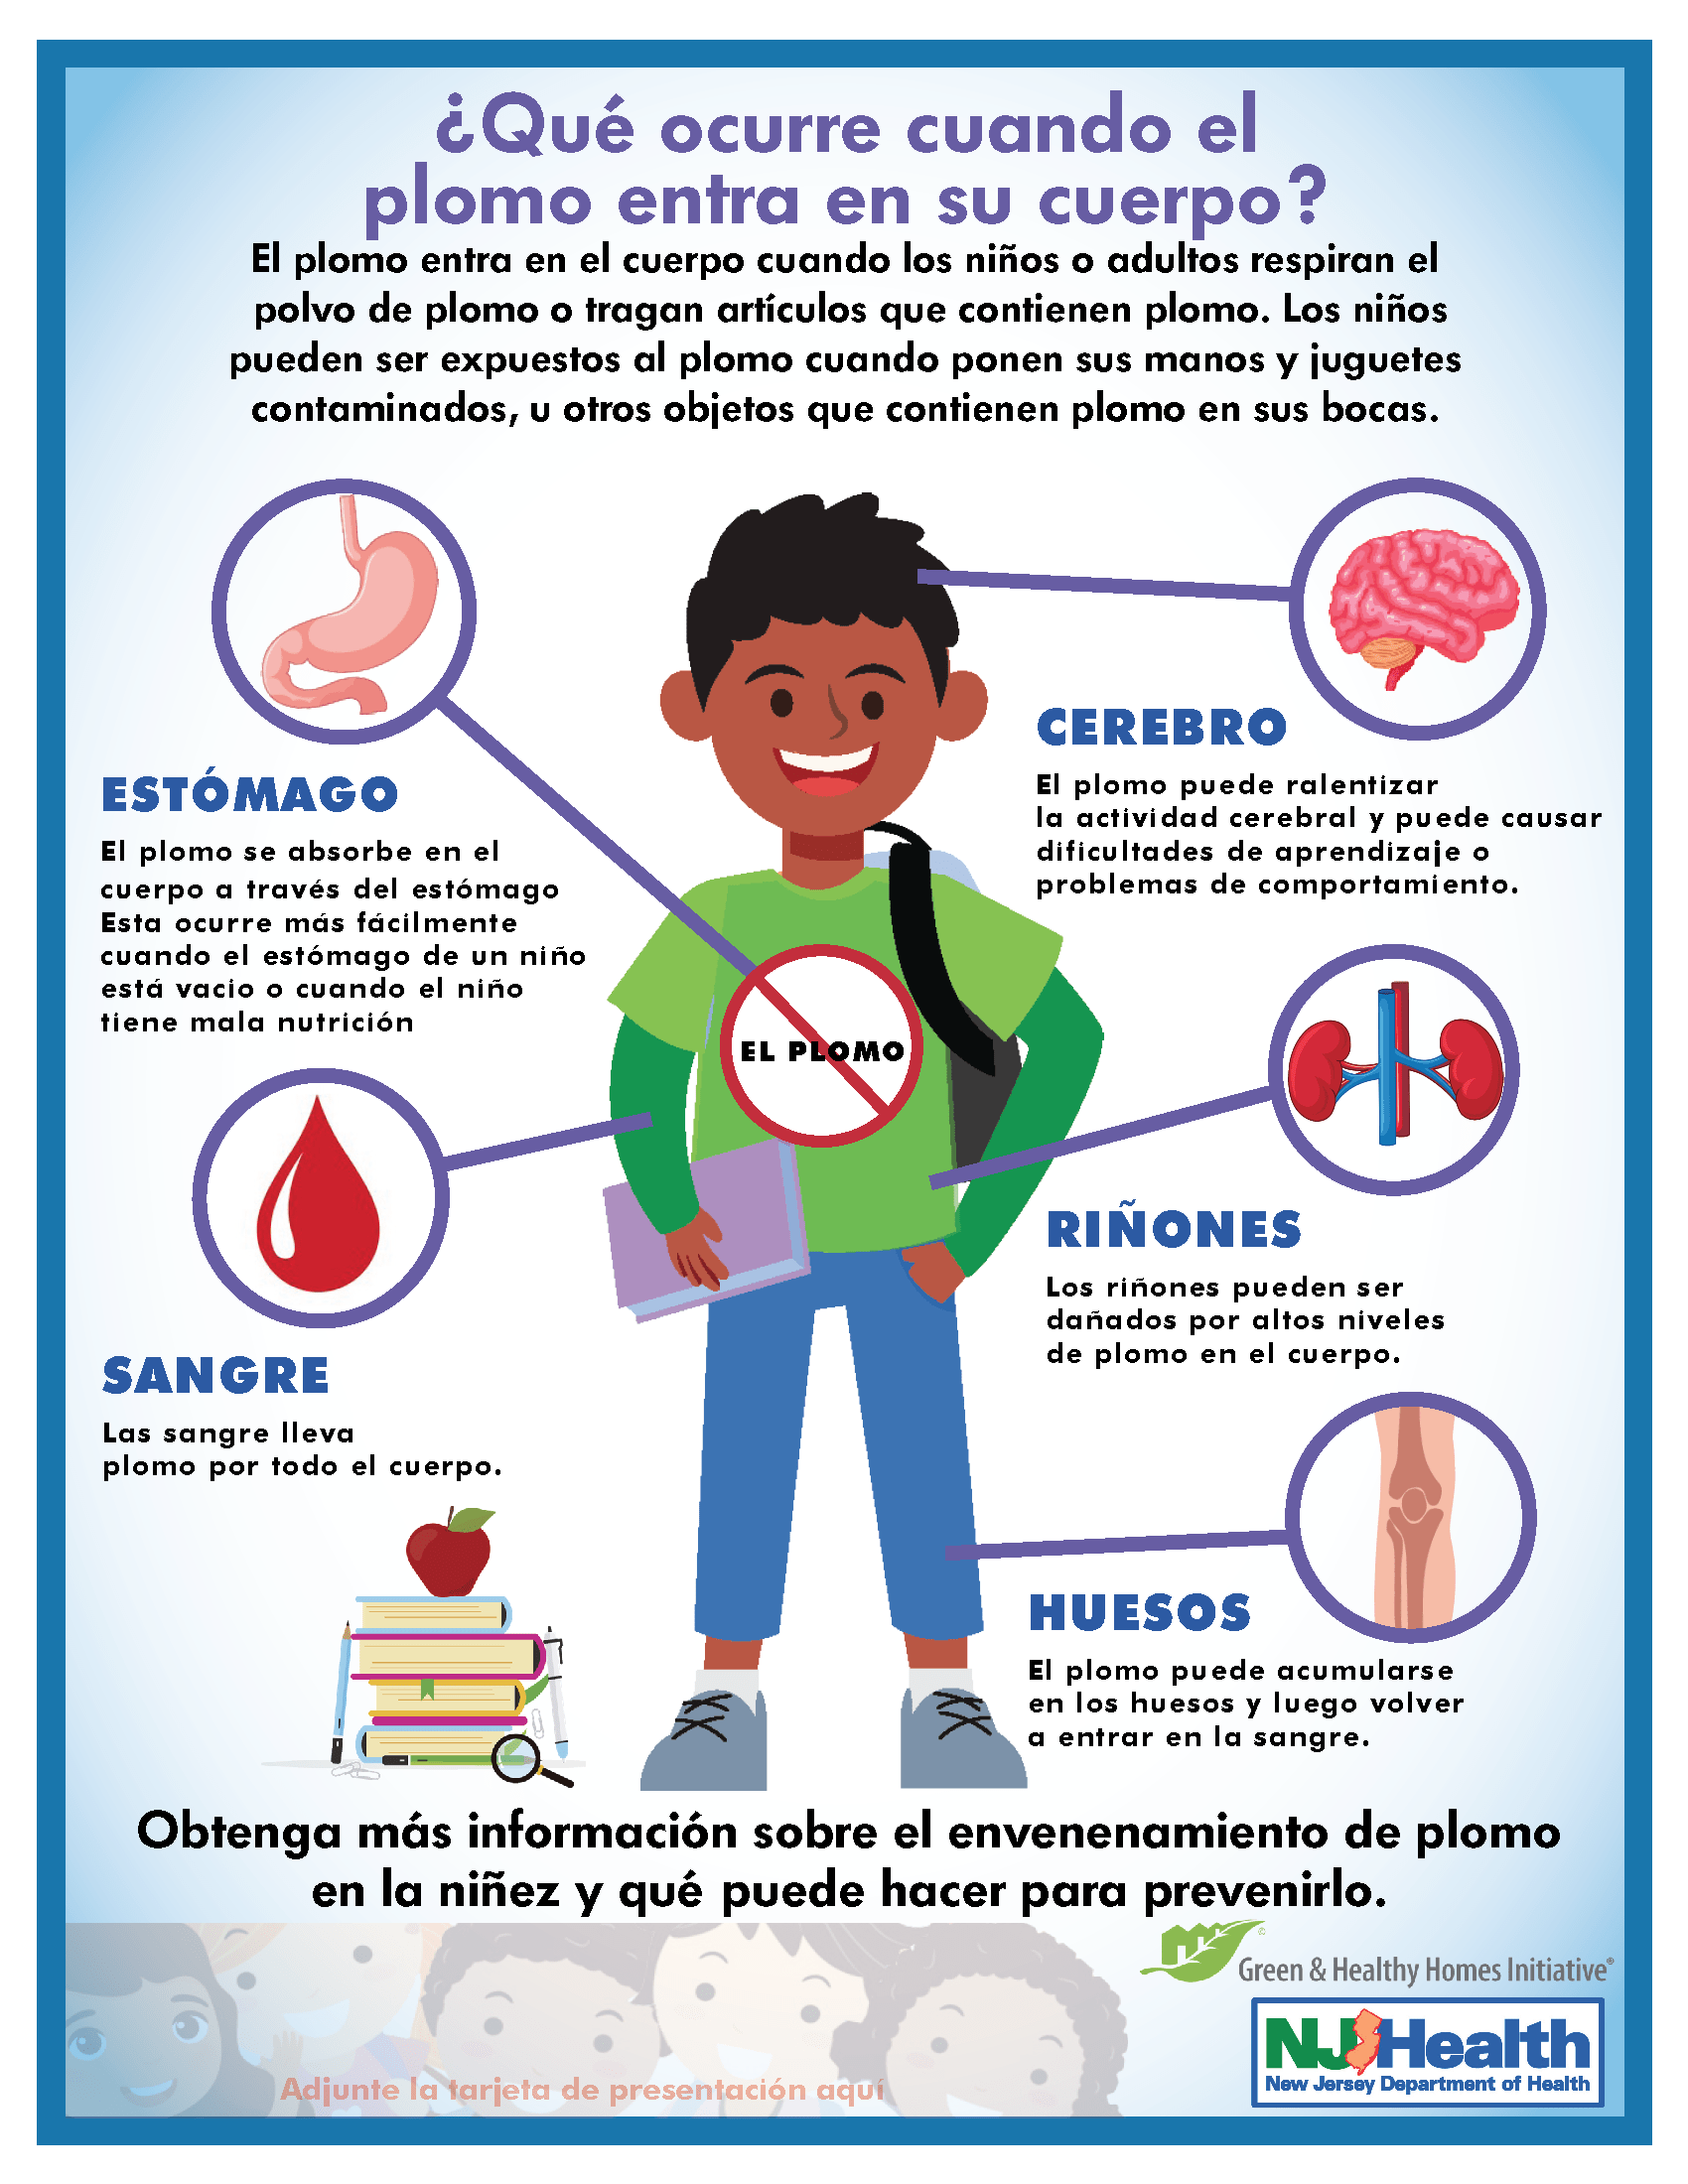 Image of a young boy surrounded by images illustrating the effects of lead on the body.